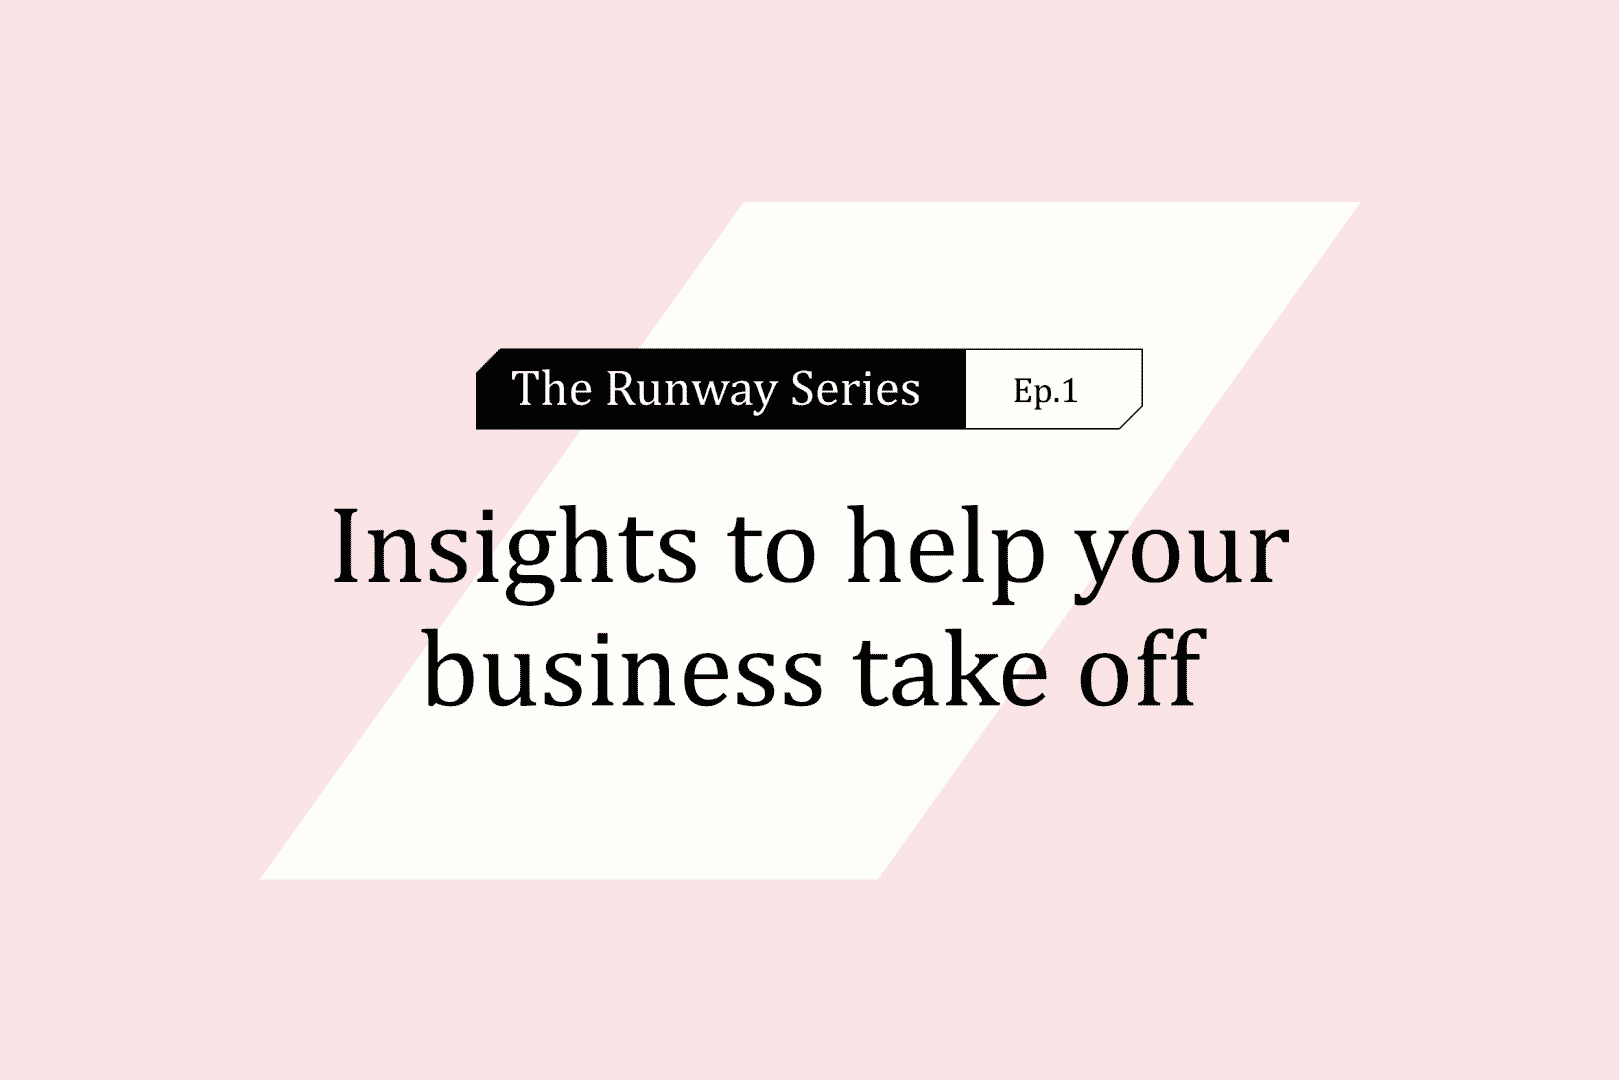 The Runway Series: Insights to help your business take off